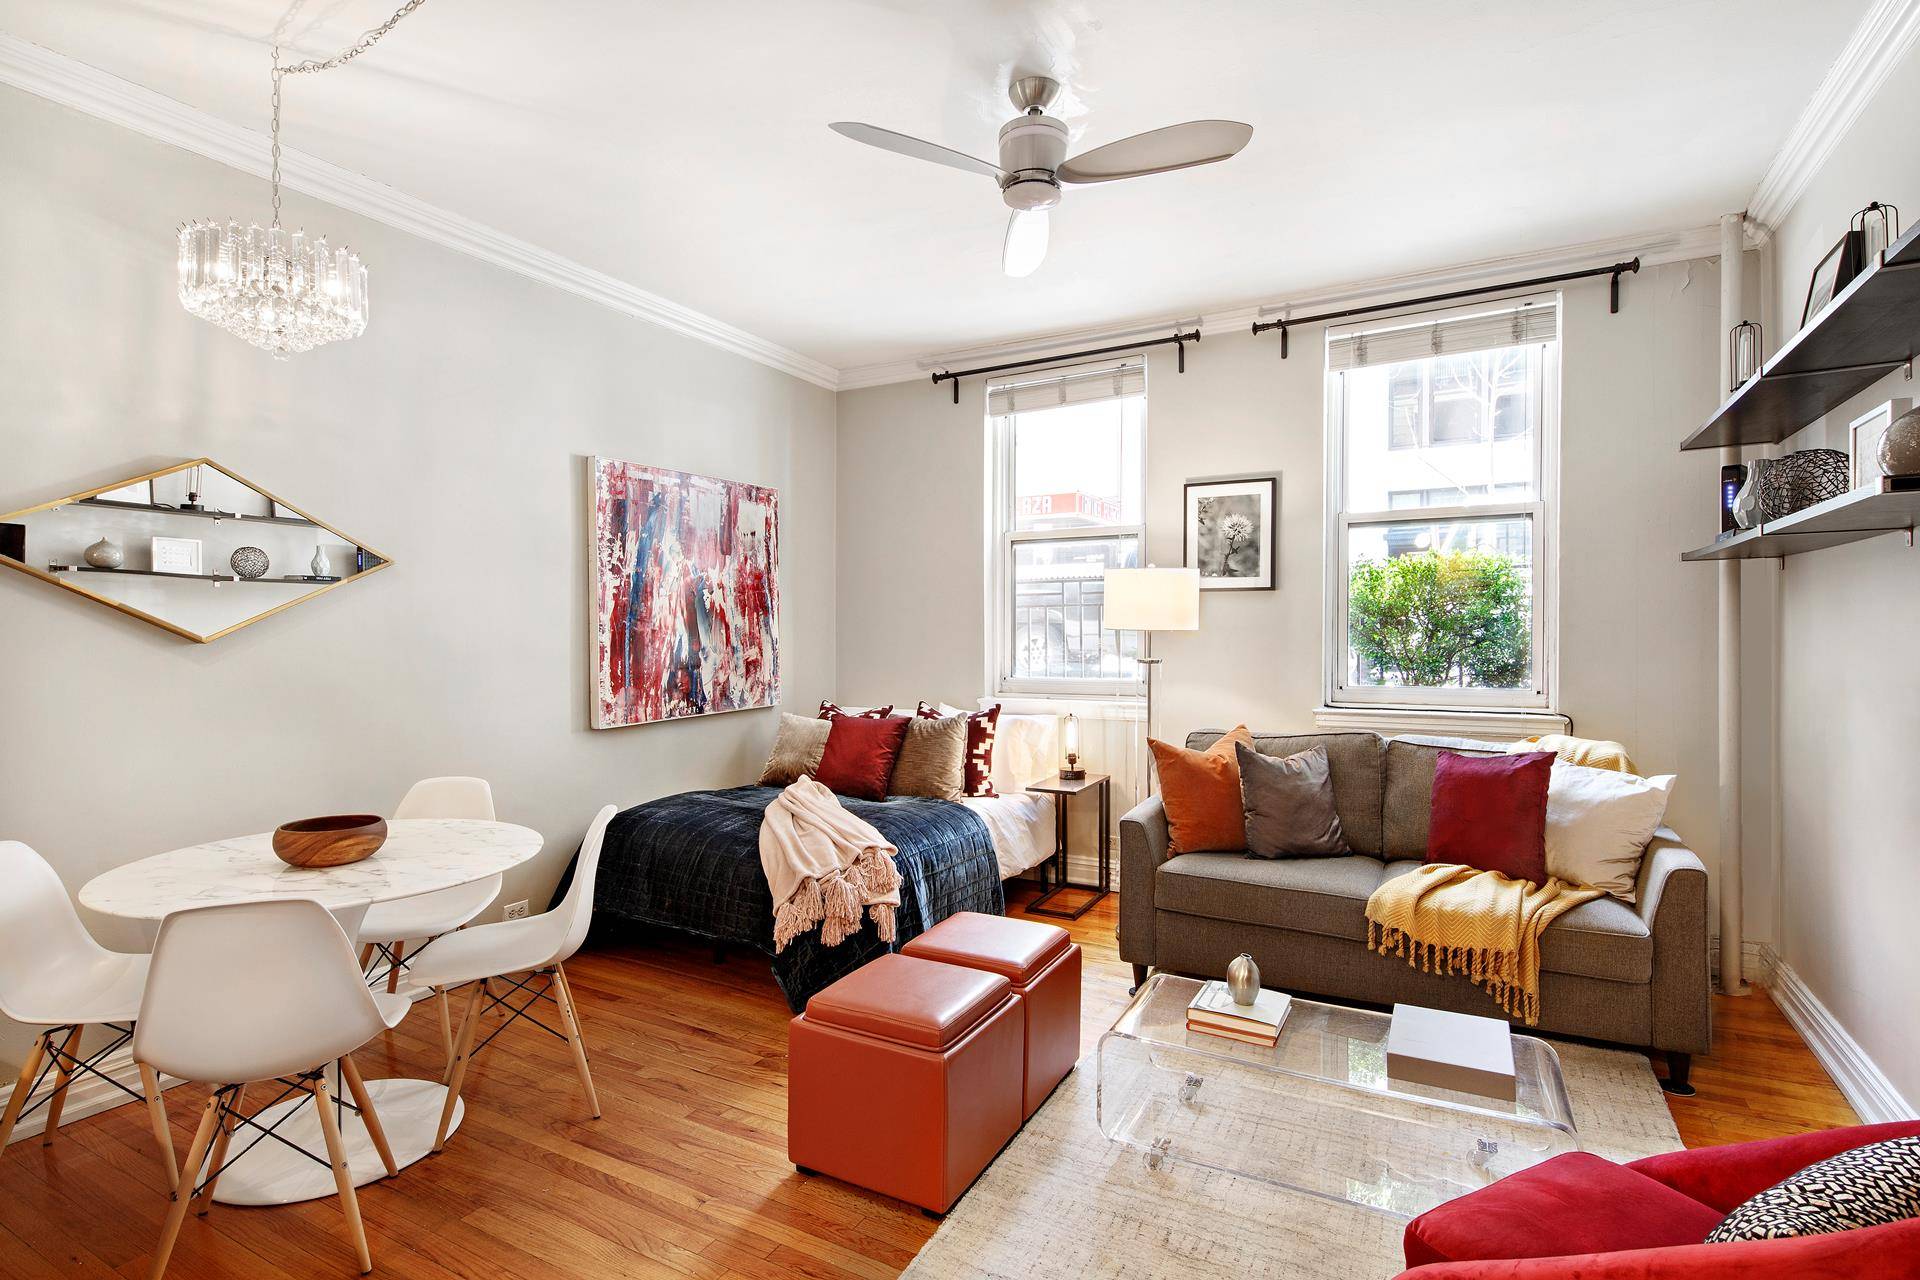 Gramercy Jewel Box ! This modernized studio makes a fabulous residence or pied a terre, set in a highly sought after prewar building on coveted Irving Place.